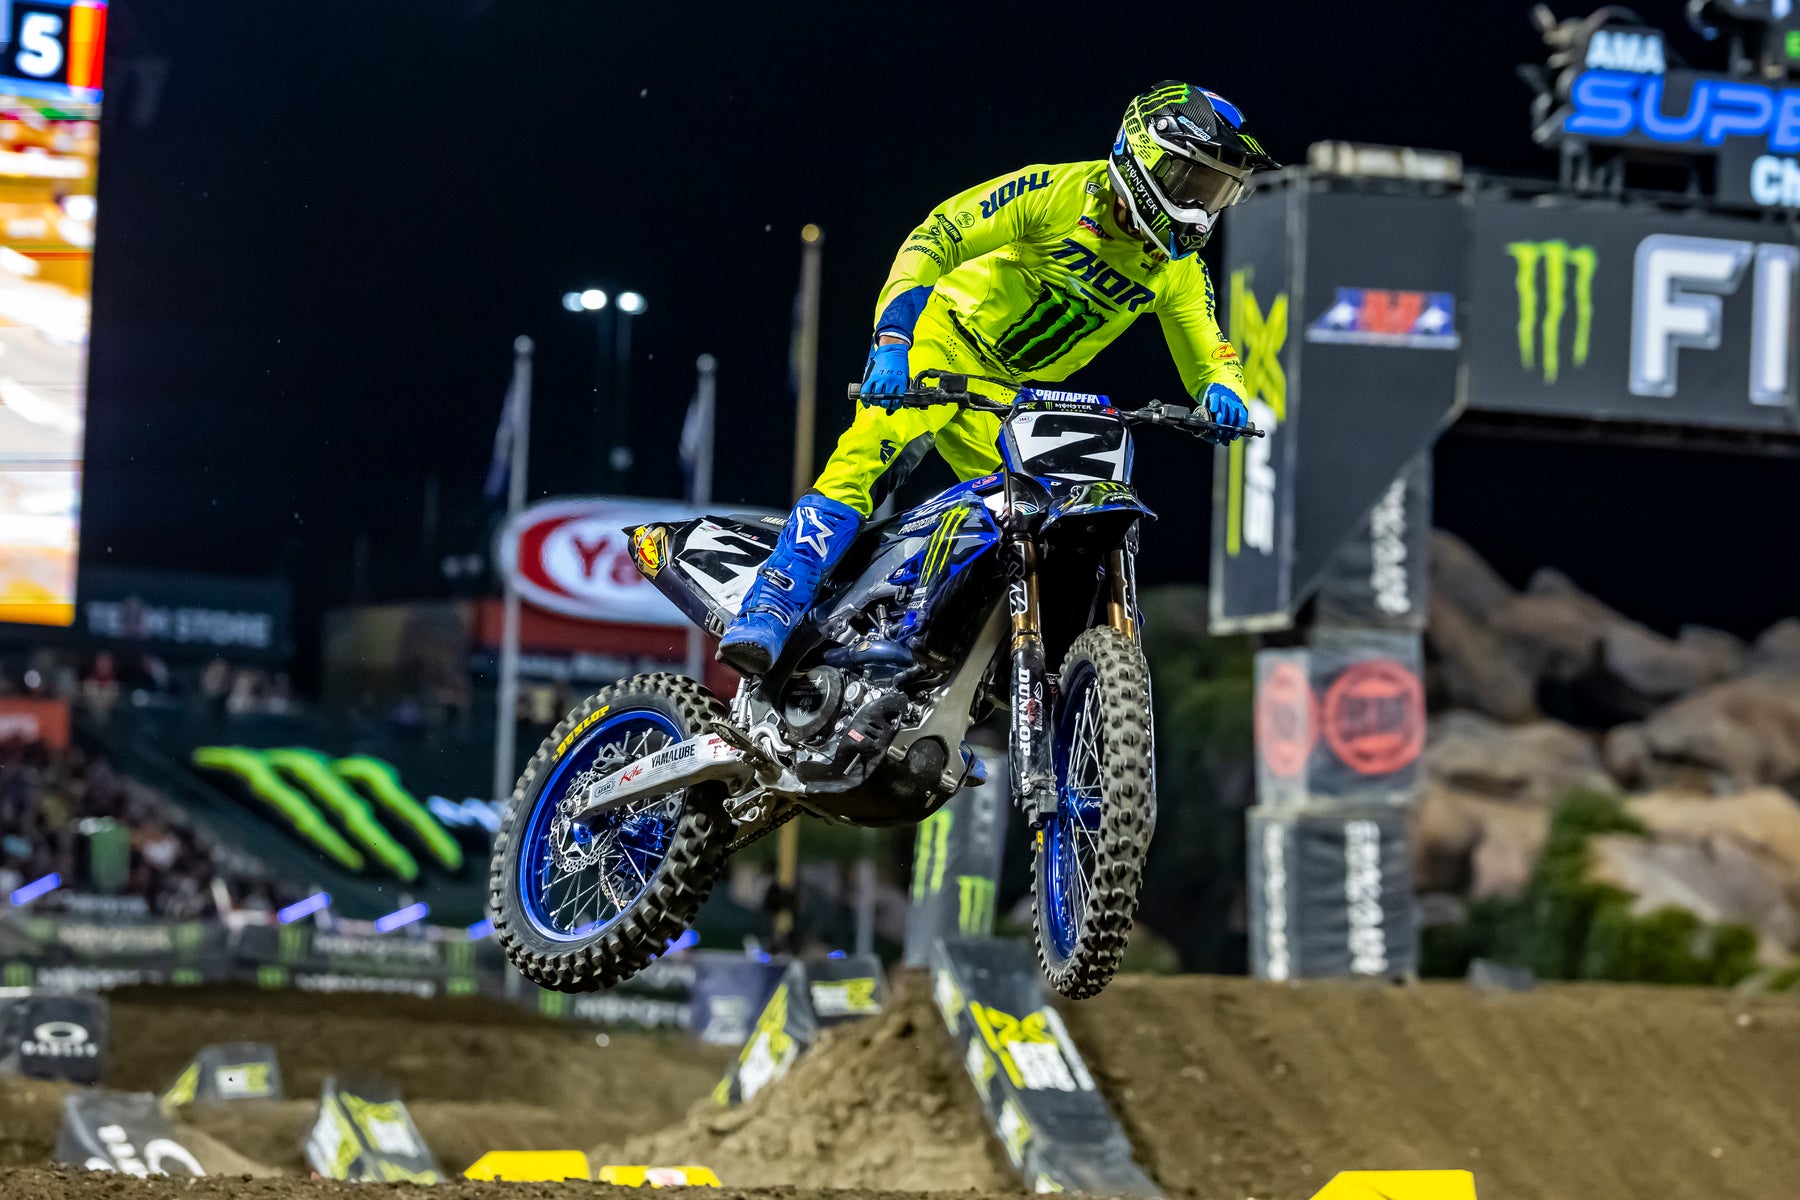 ALPINESTARS TOP SIX LOCK-OUT AS COOPER WEBB SNATCHES 450 TRIPLE CROWN AT ANAHEIM 2 SUPERCROSS, CALIFORNIA